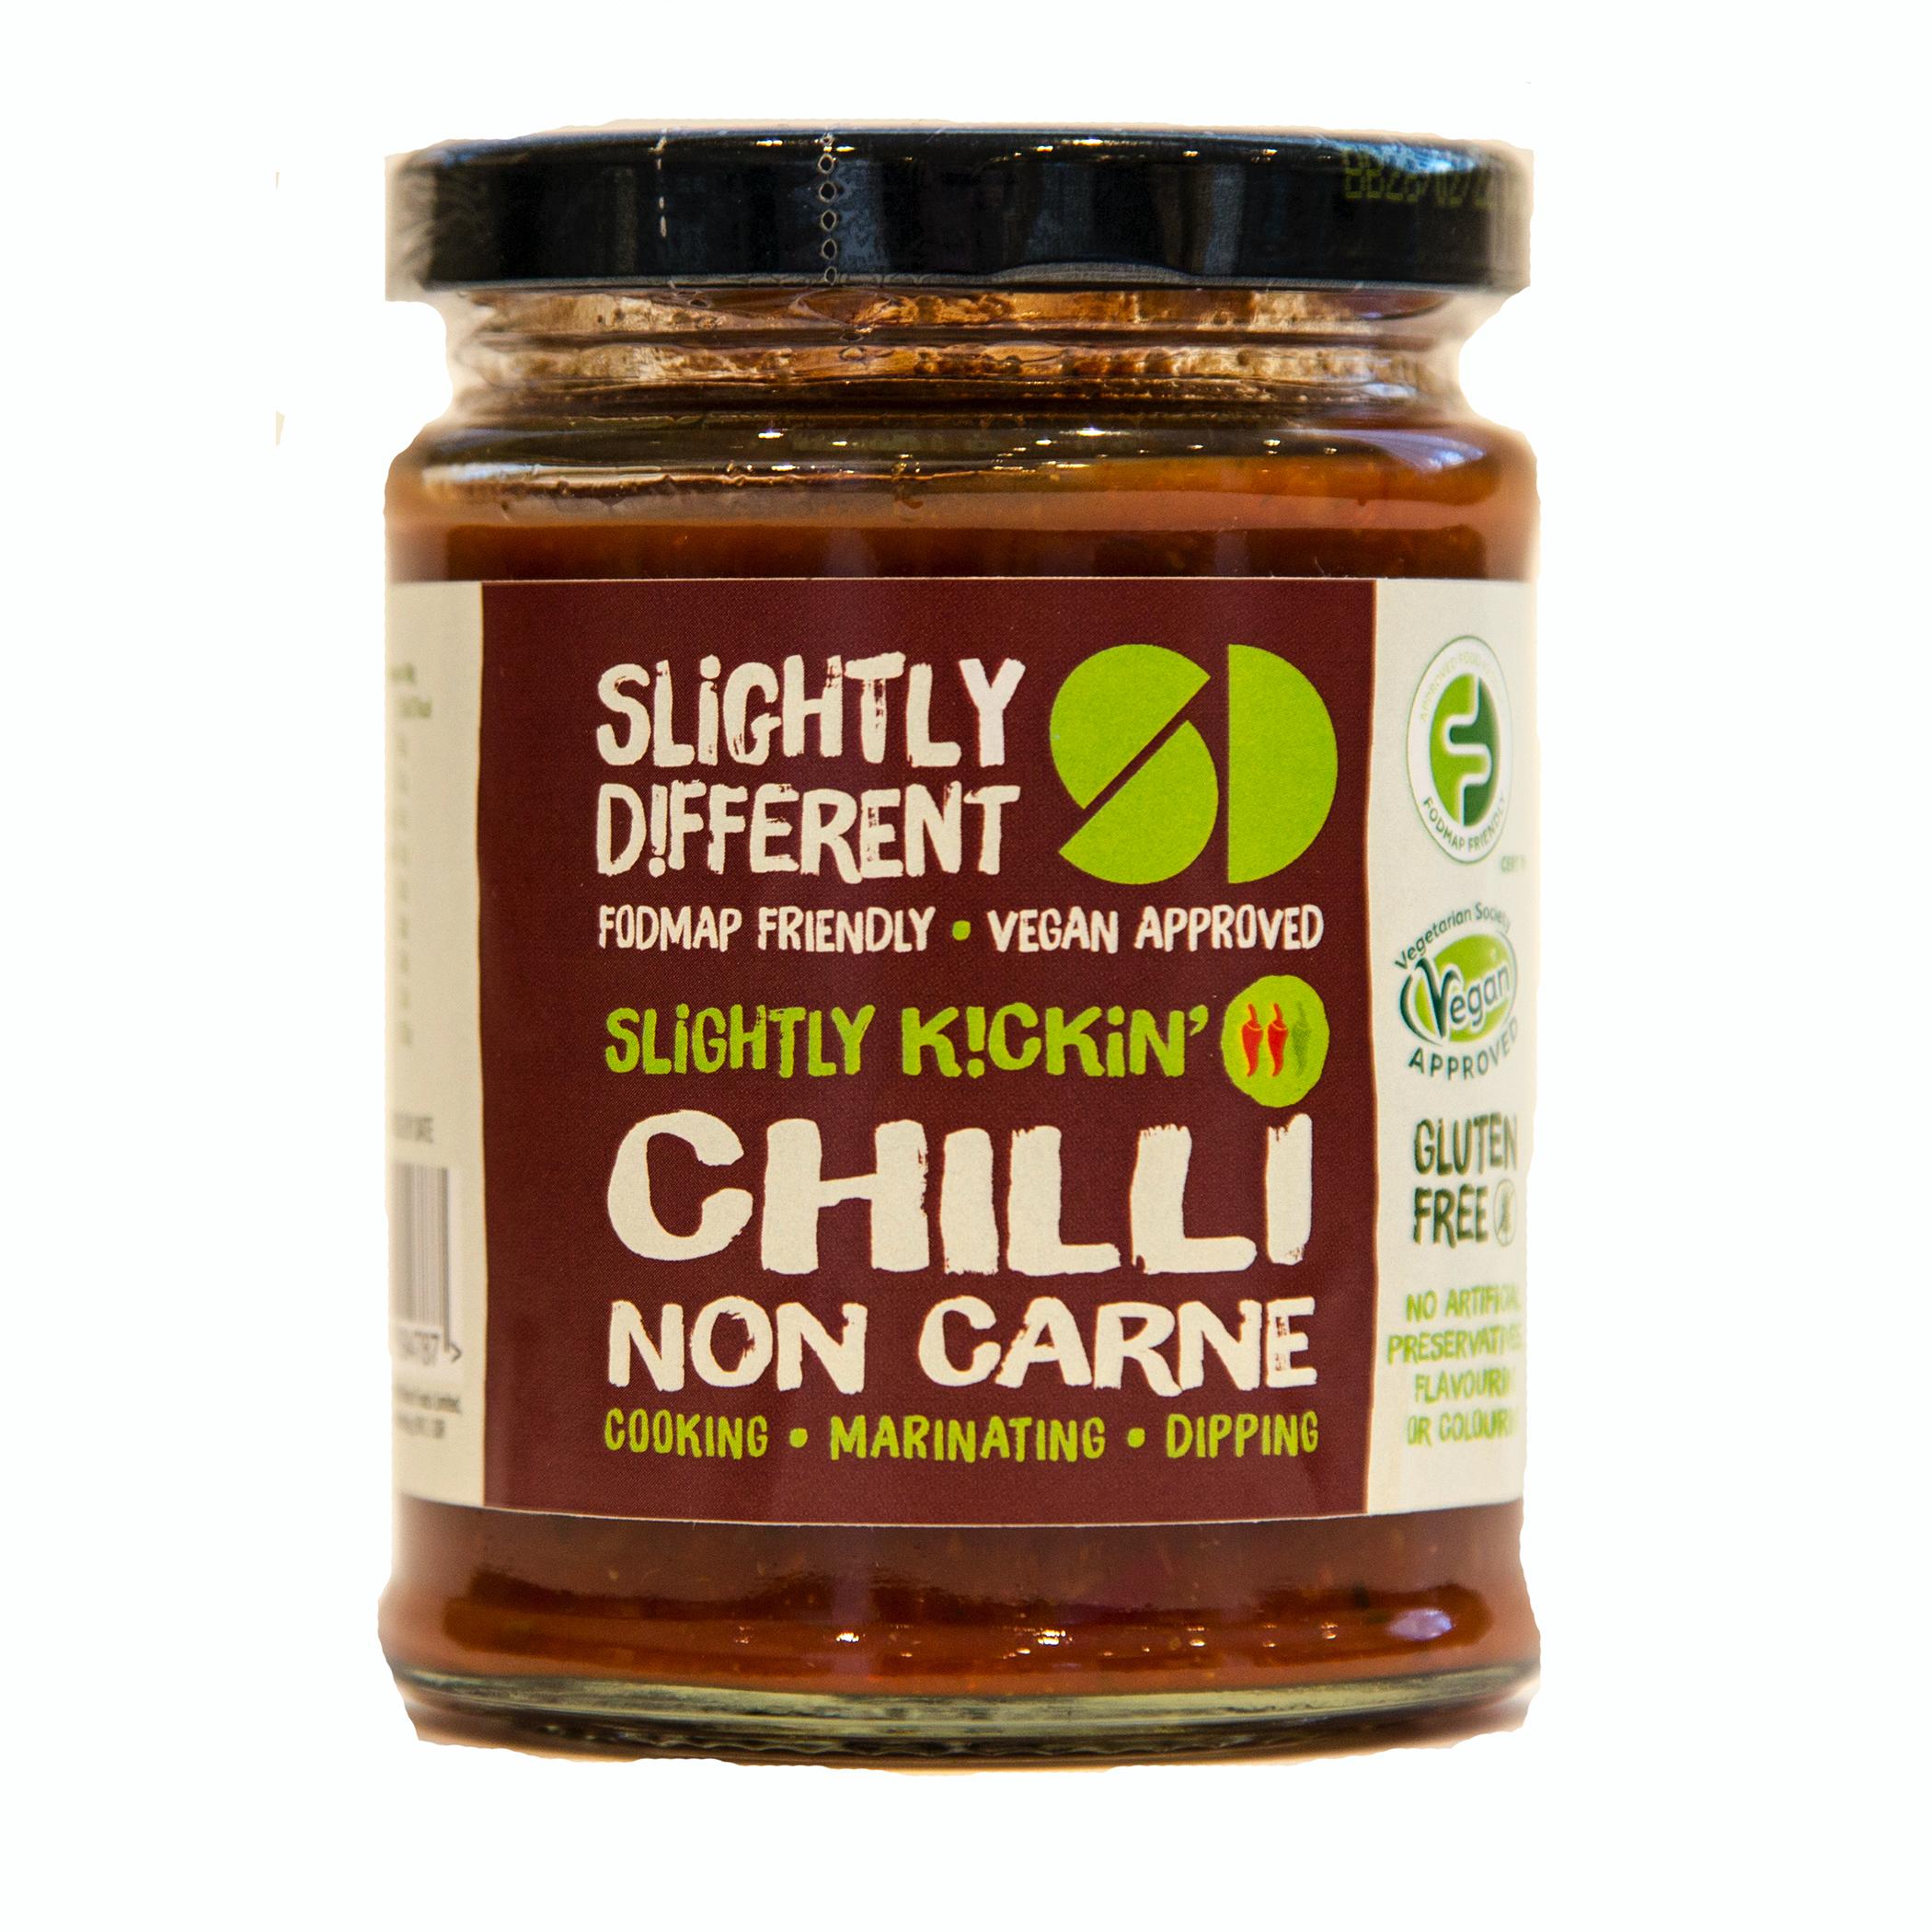 A jar of Slightly Different's Chilli Non Carne Sauce